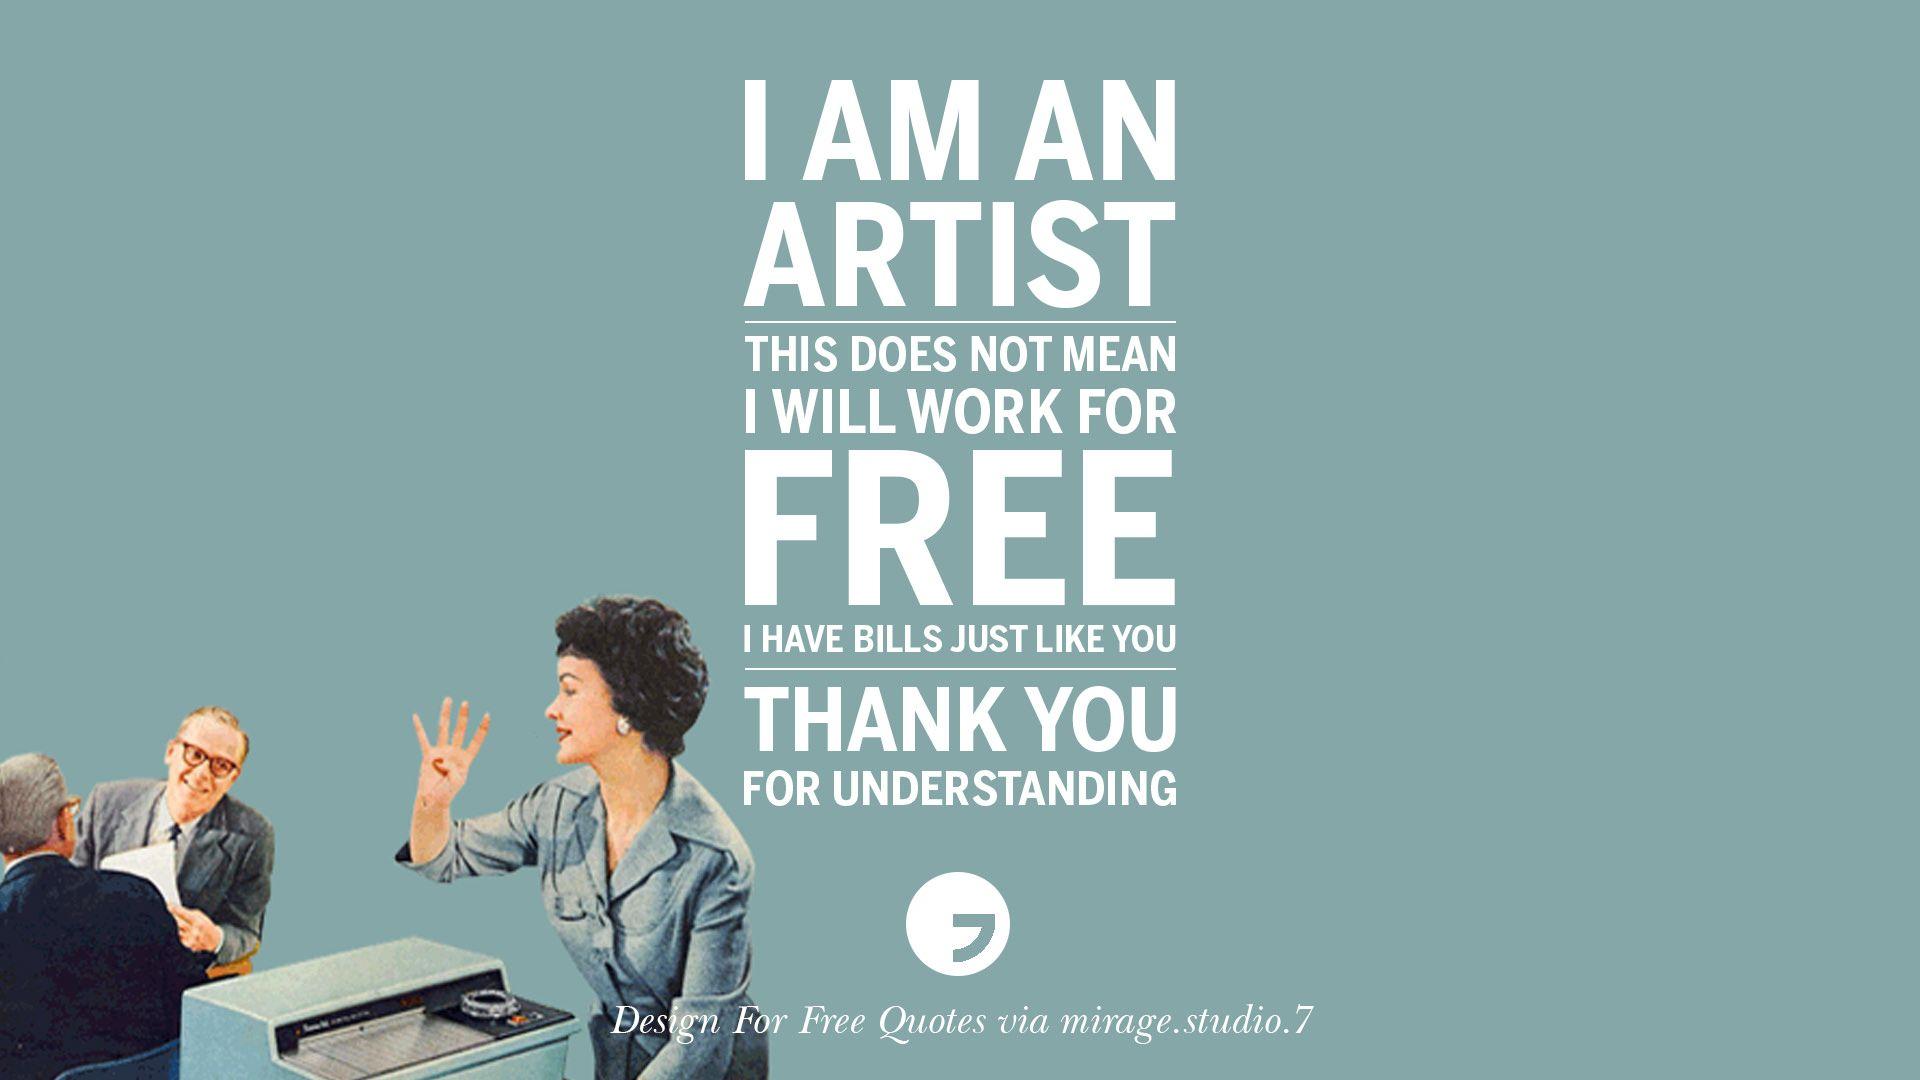 10 Sarcastic 'Design For Free' Quotes For Interior Designers And